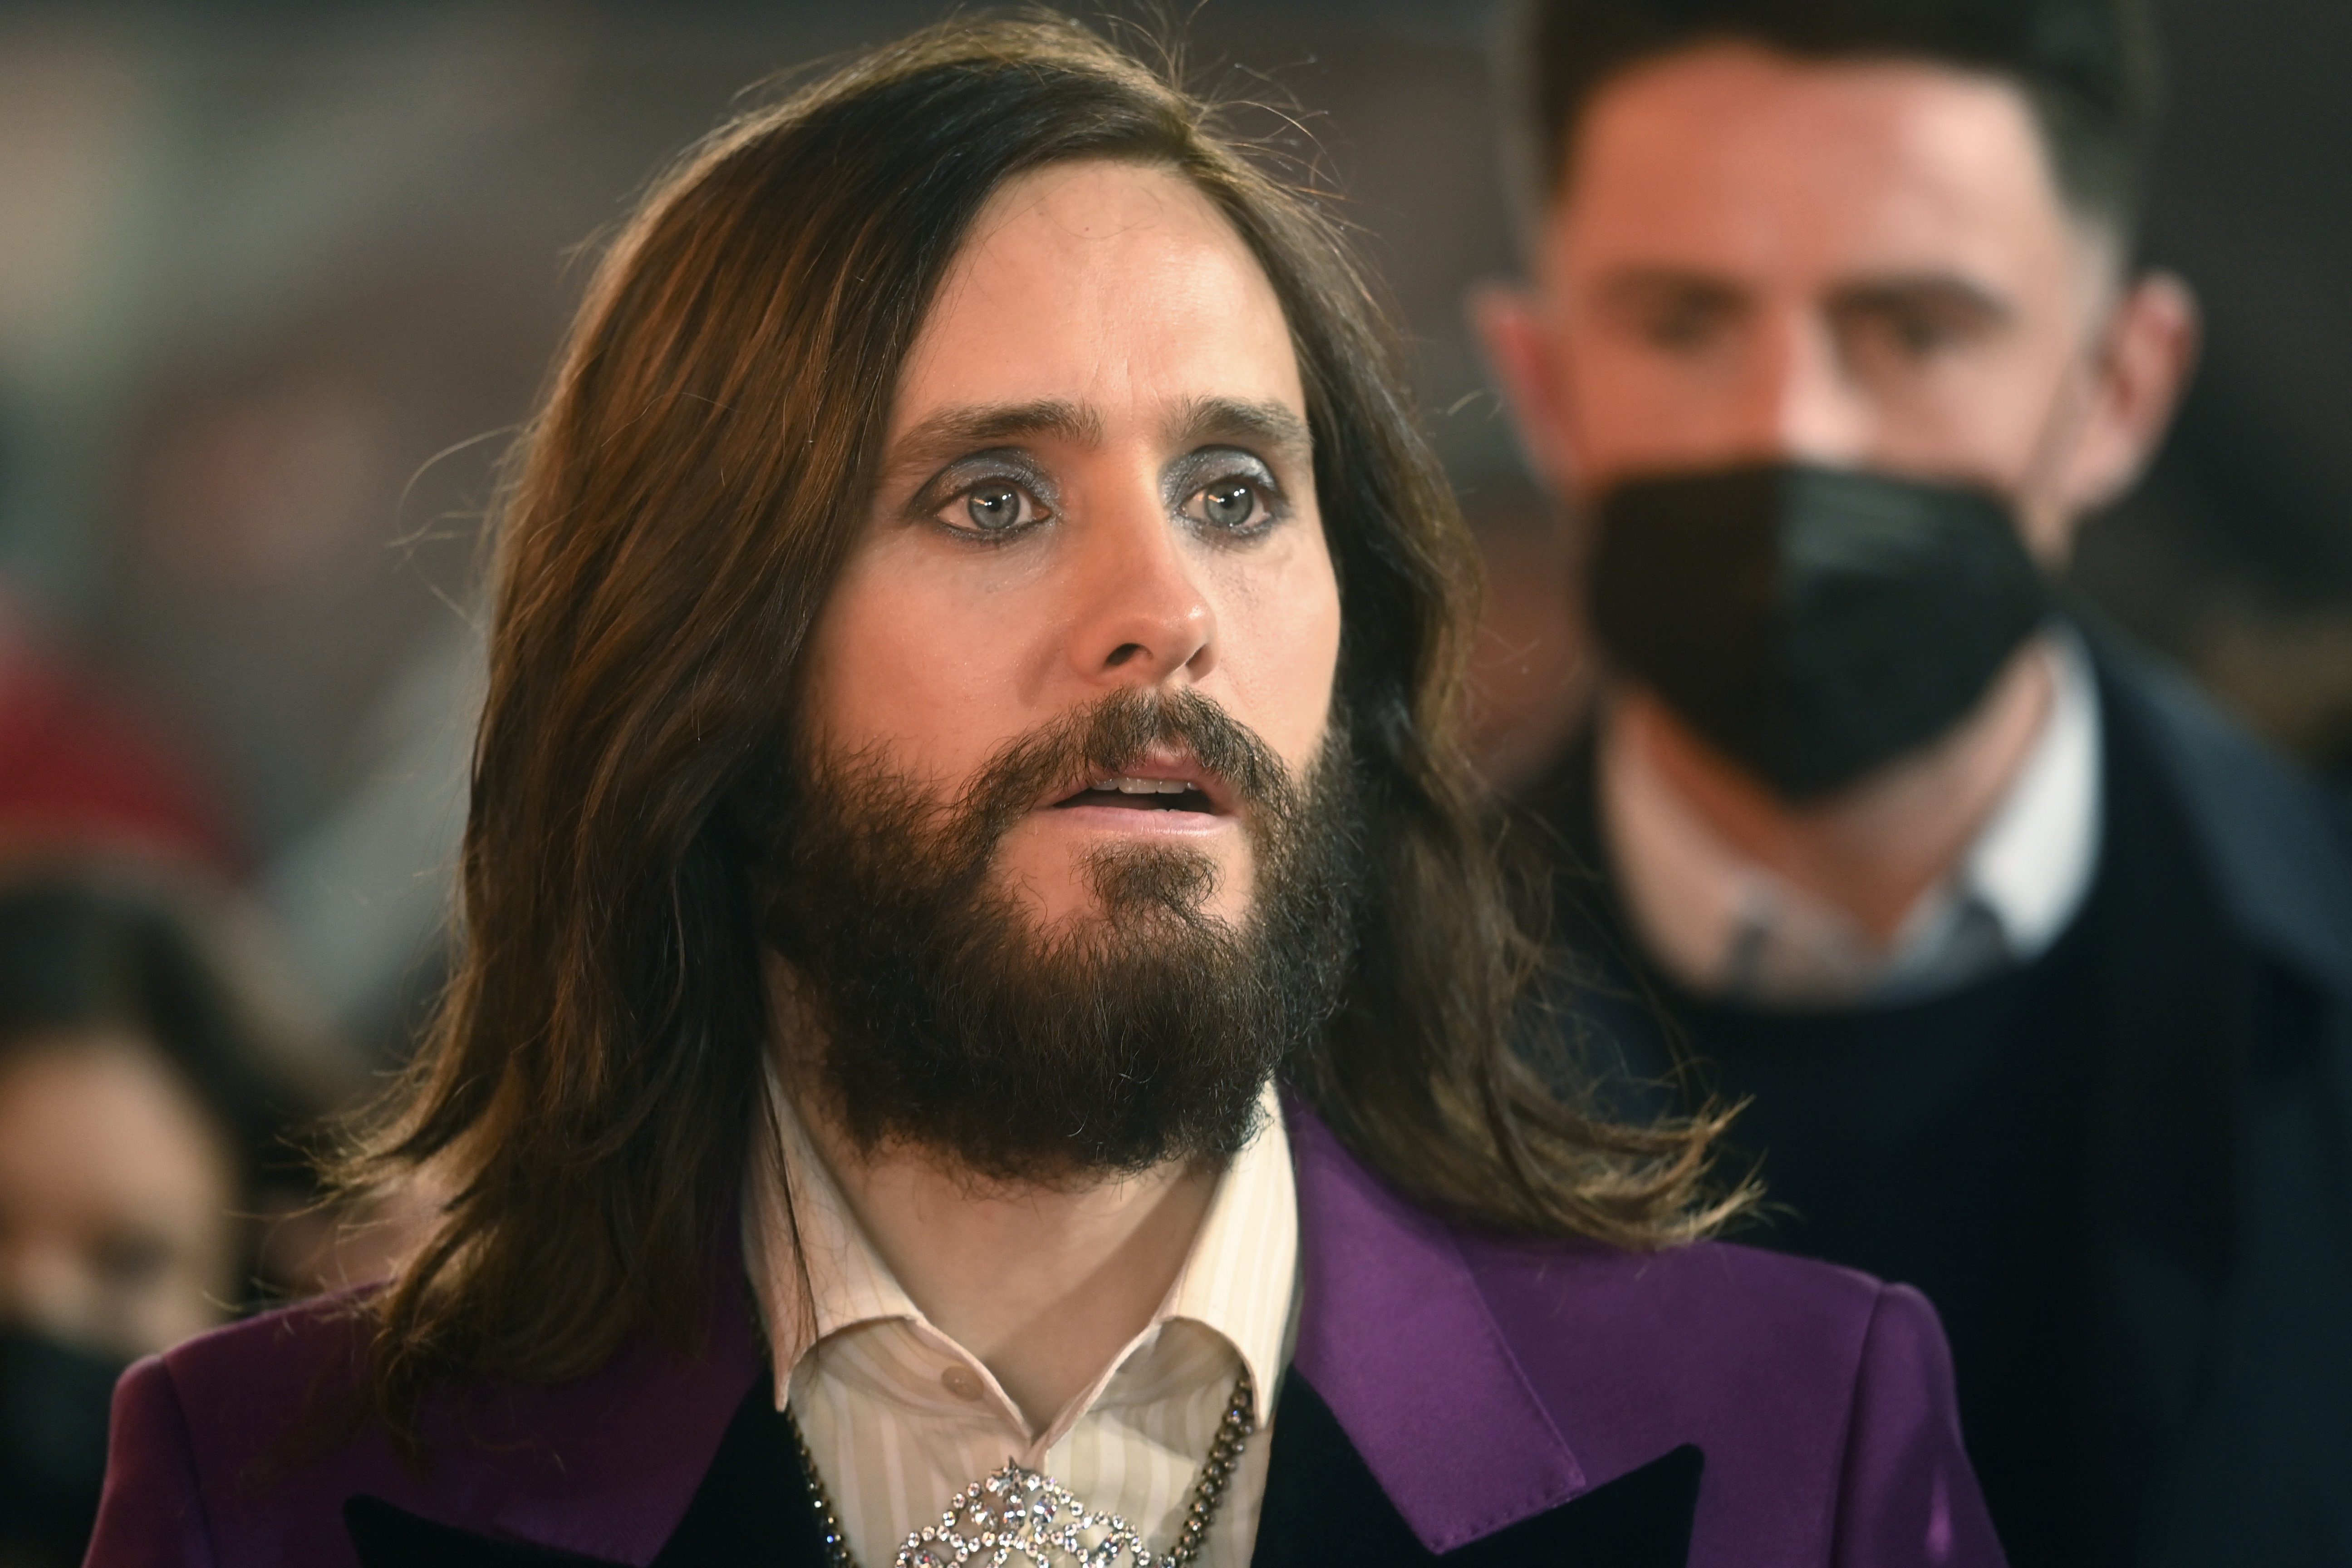 Jared Leto, who gives an update on Tron 3, attends a London fan screening for Morbius.